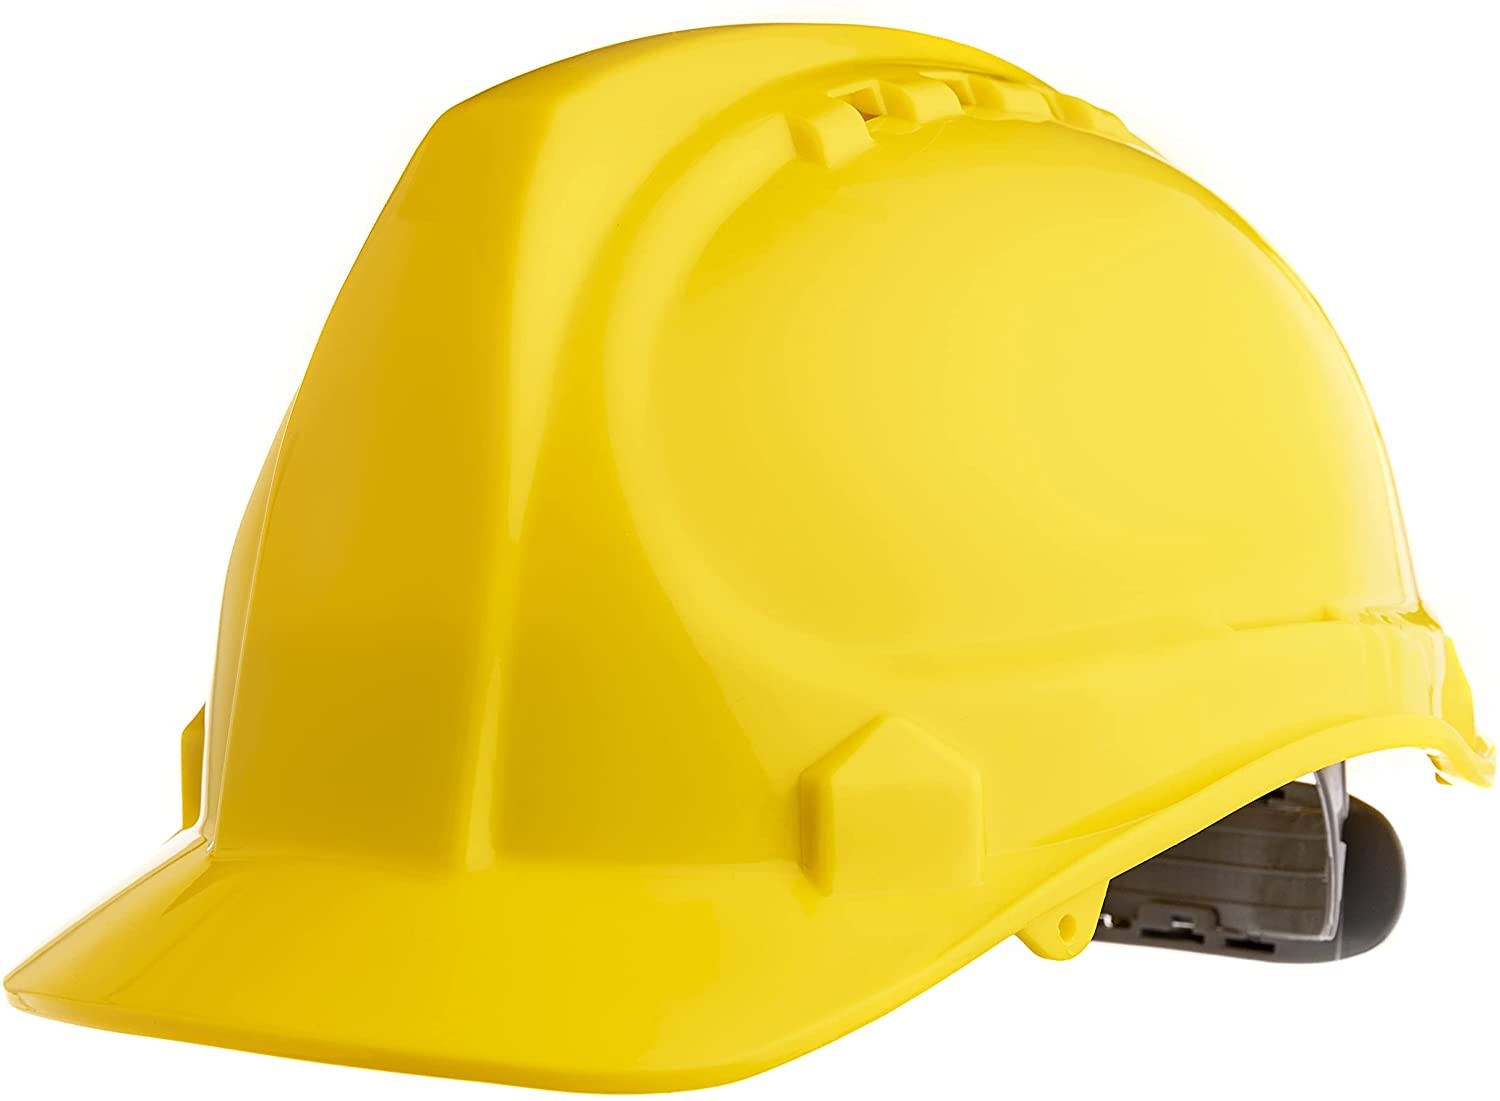 Buy OEM ODM Head Protection Helmet 62cm ABS Construction Hard Hats at wholesale prices